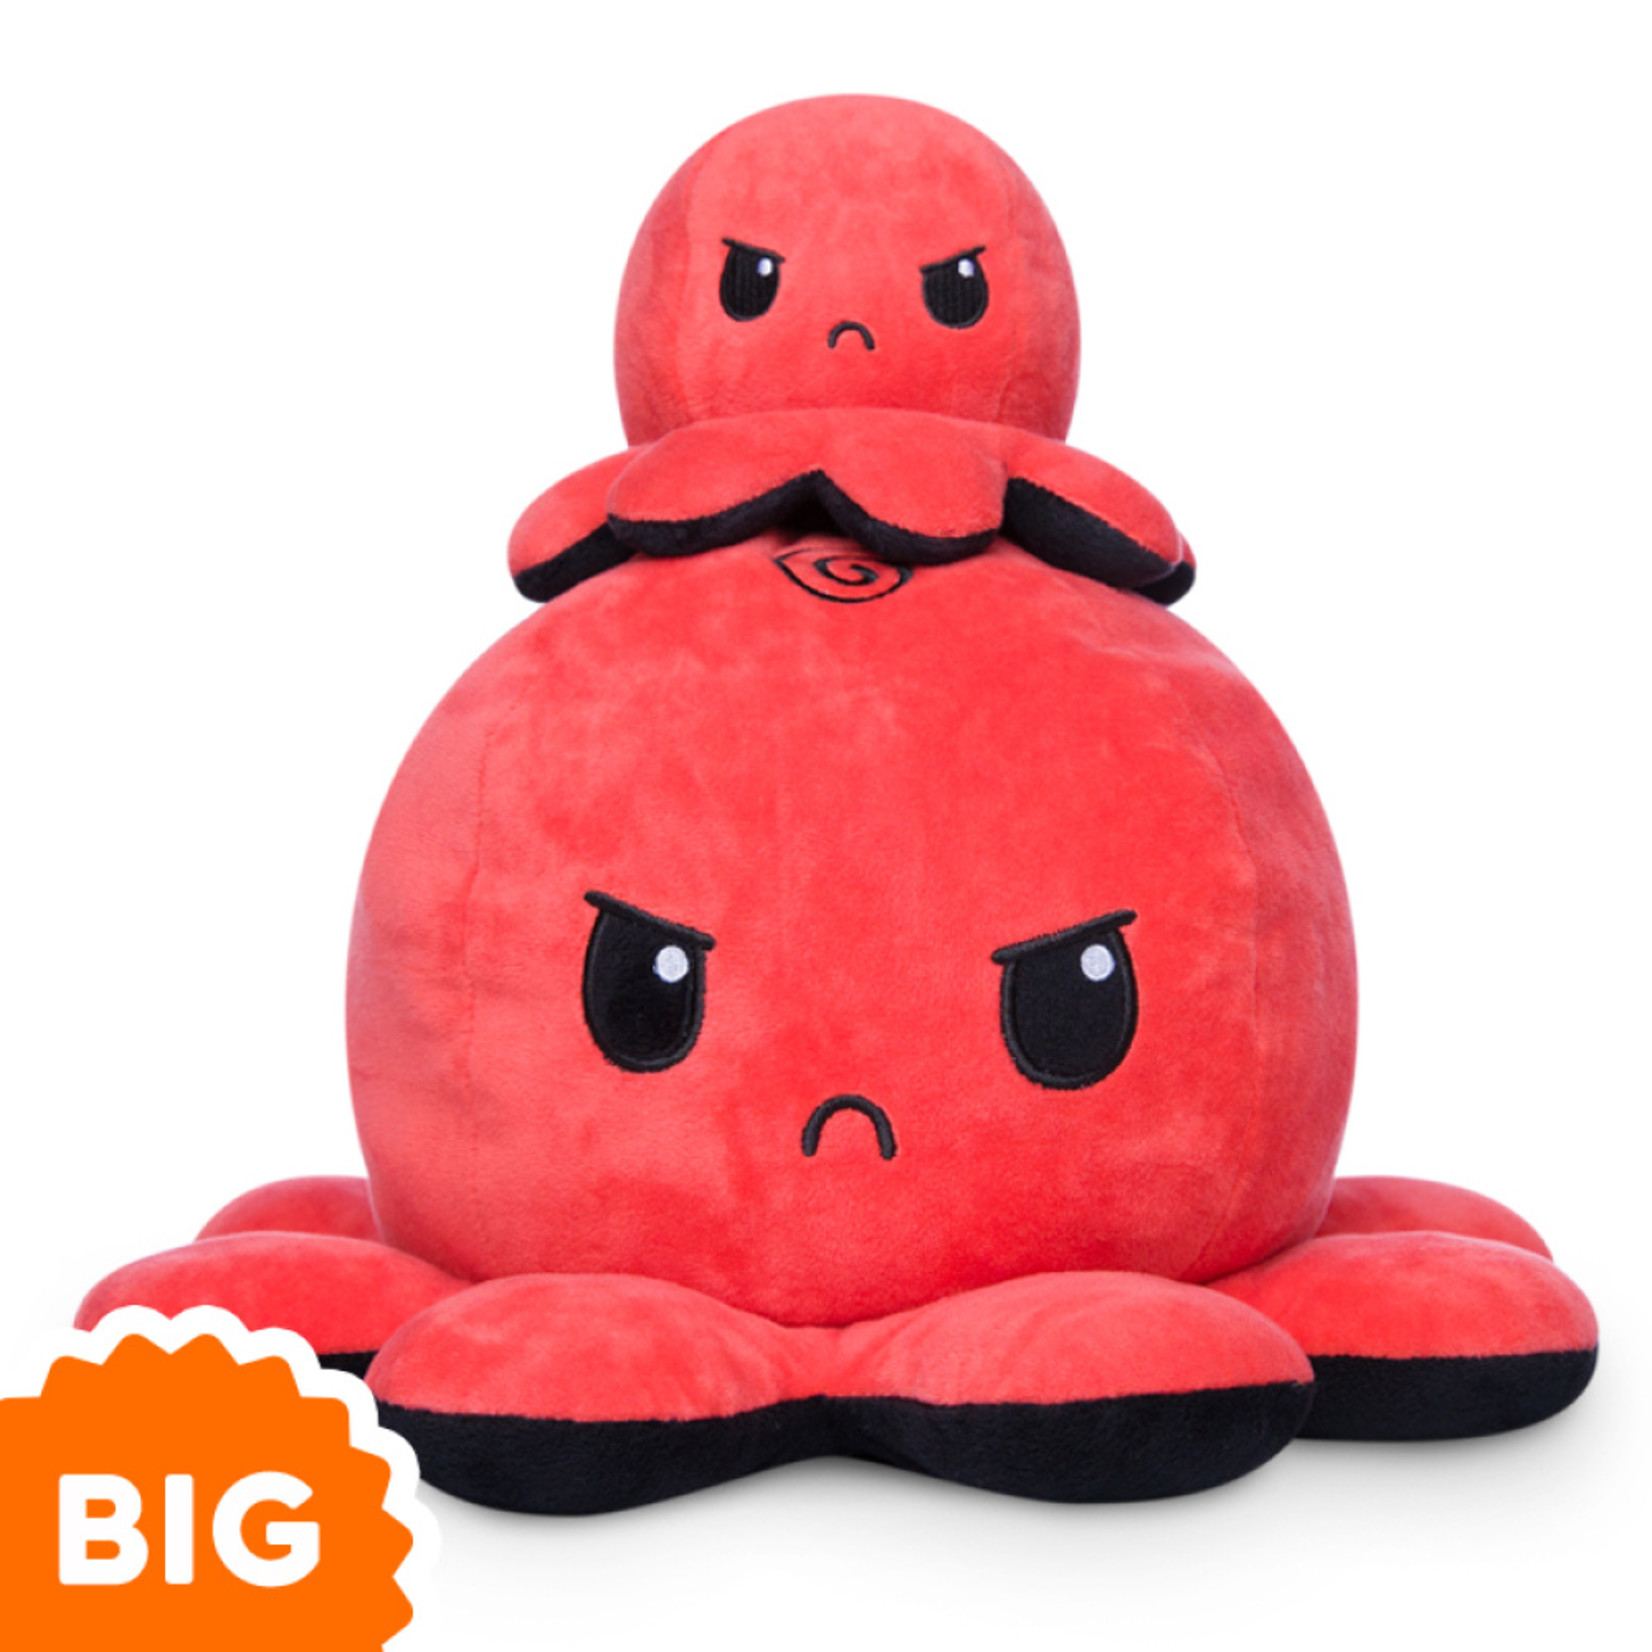 BIG Reversible Octopus Plushie: Angry Red and RAGE Black